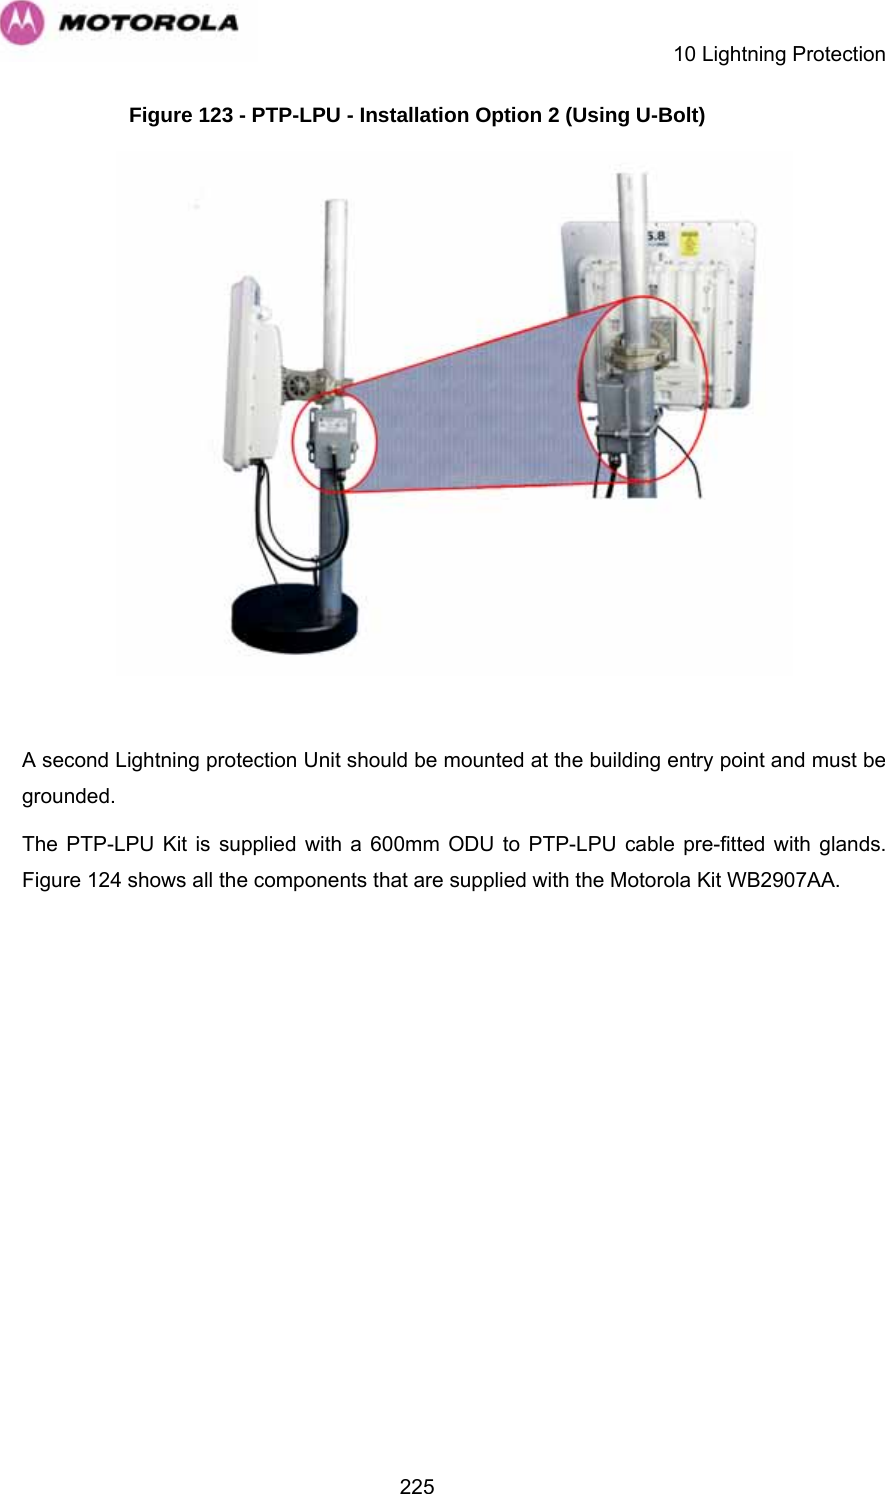    10 Lightning Protection  225Figure 123 - PTP-LPU - Installation Option 2 (Using U-Bolt)   A second Lightning protection Unit should be mounted at the building entry point and must be grounded. The PTP-LPU Kit is supplied with a 600mm ODU to PTP-LPU cable pre-fitted with glands. Figure 124 shows all the components that are supplied with the Motorola Kit WB2907AA.  